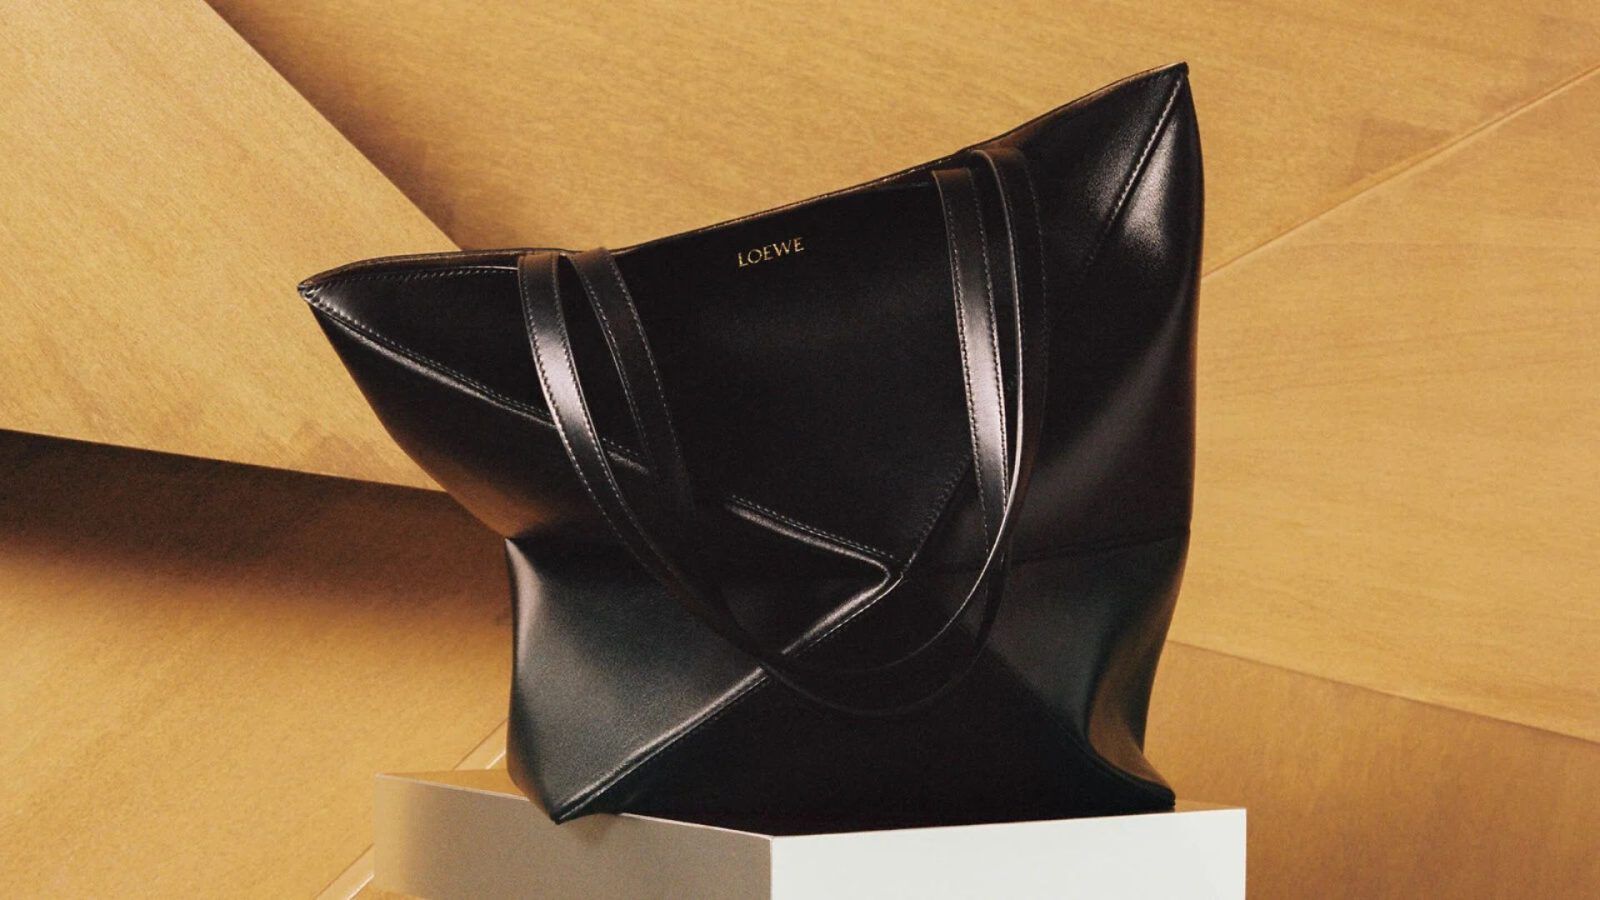 The LOEWE Nano Puzzle Is The Smallest-Ever Version Of Their Iconic Bag